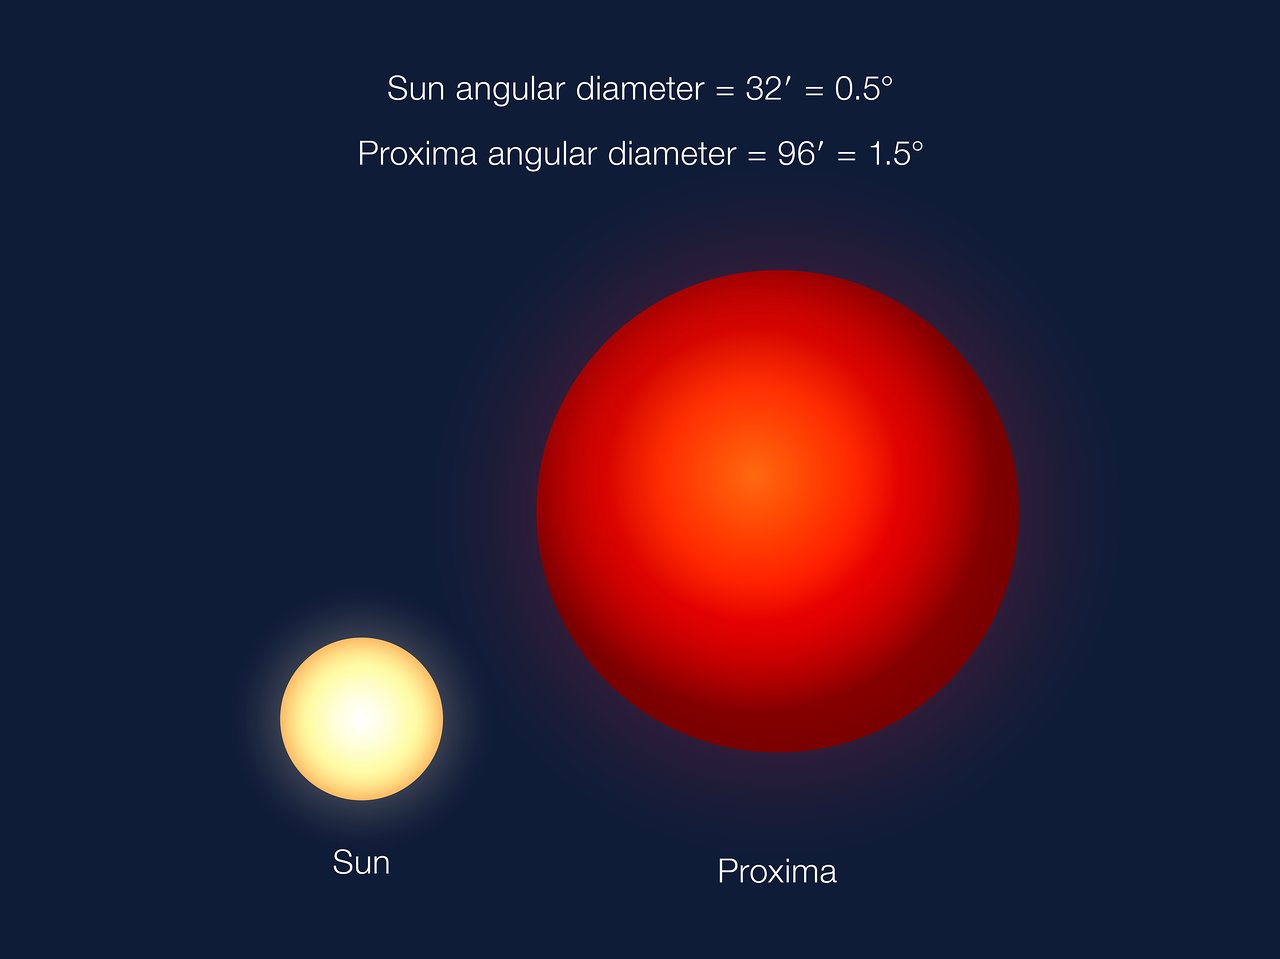 An angular size comparison of how Proxima will appear in the sky seen from Proxima b, compared to how the Sun appears in our sky on Earth. Proxima is much smaller than the Sun, but Proxima b lies very close to its star.